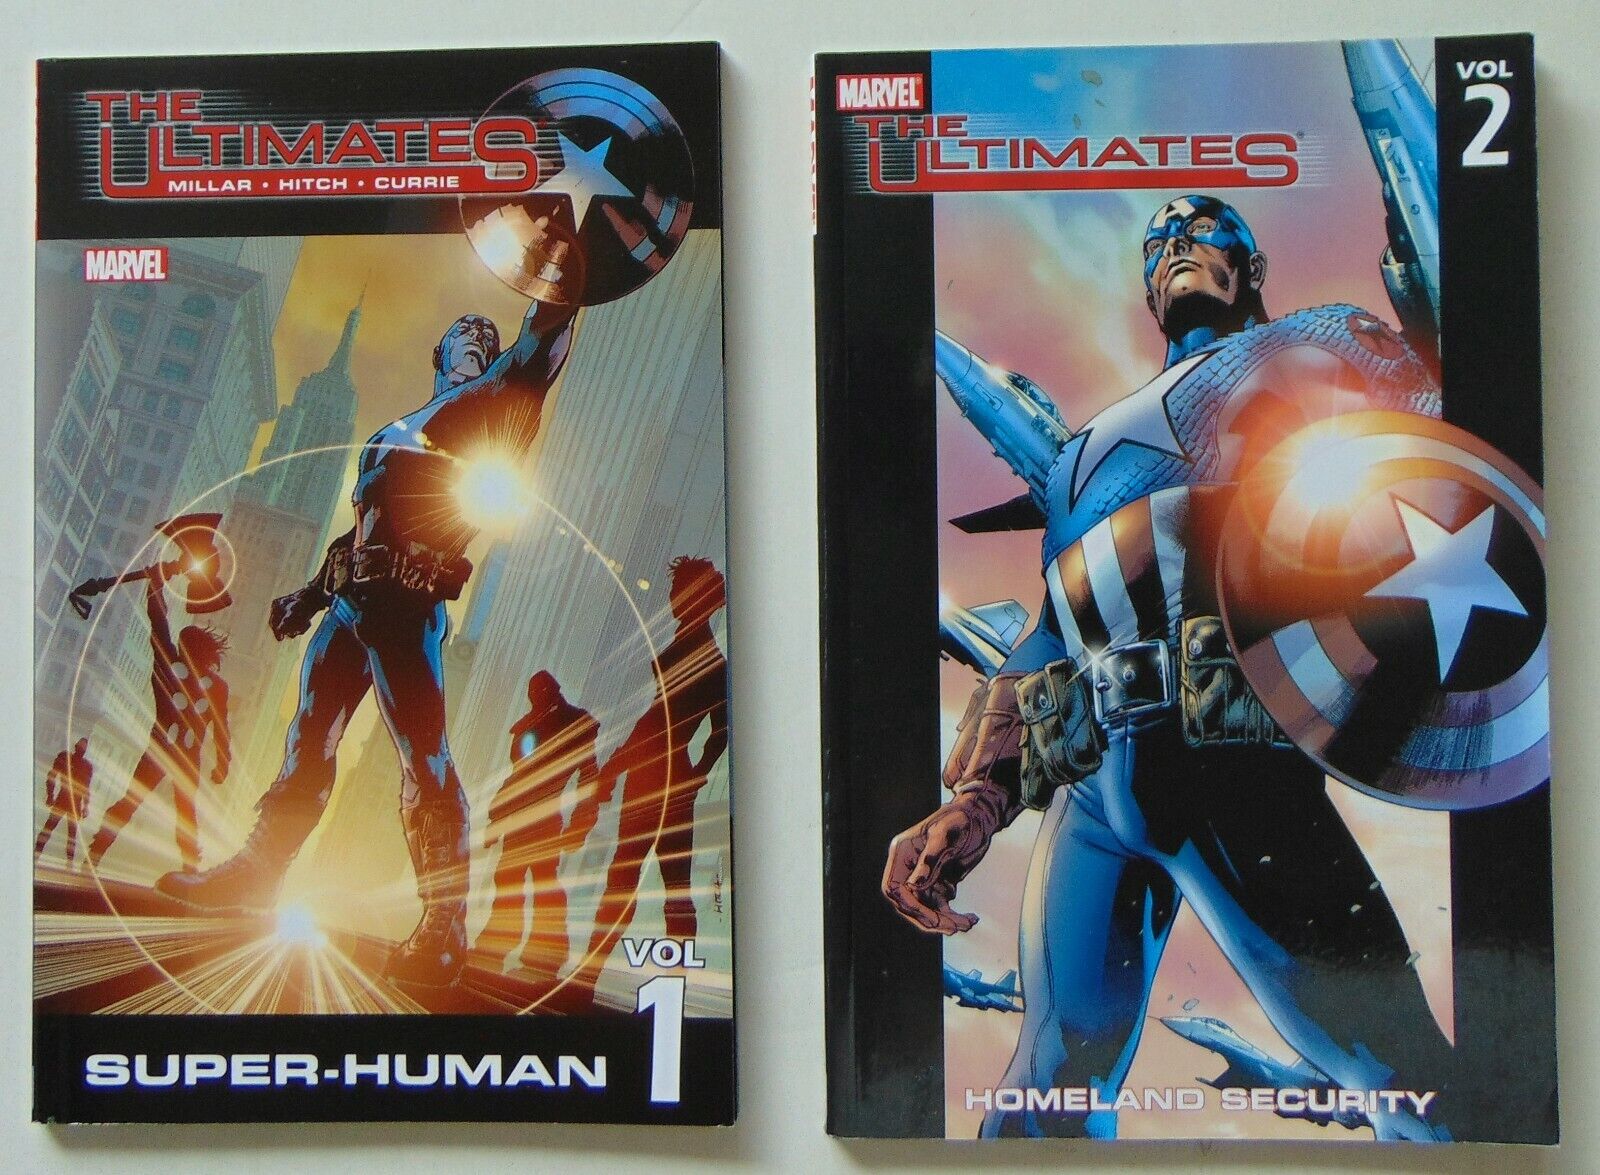 Marvel The Ultimates Volumes 1 and 2 Trade Paperbacks